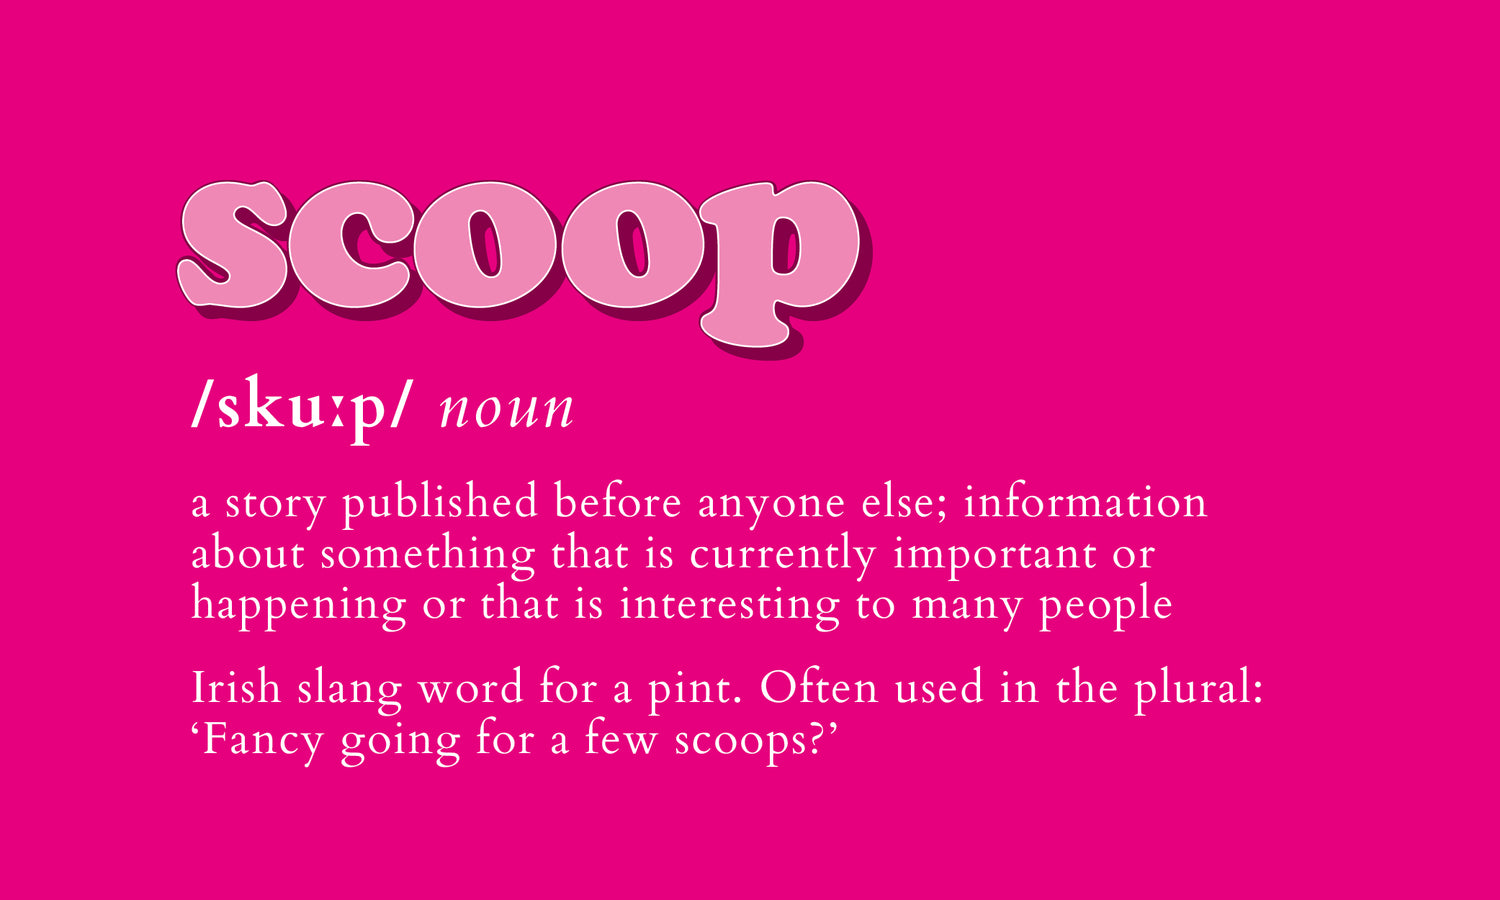 scoop, Definition from the Food topic